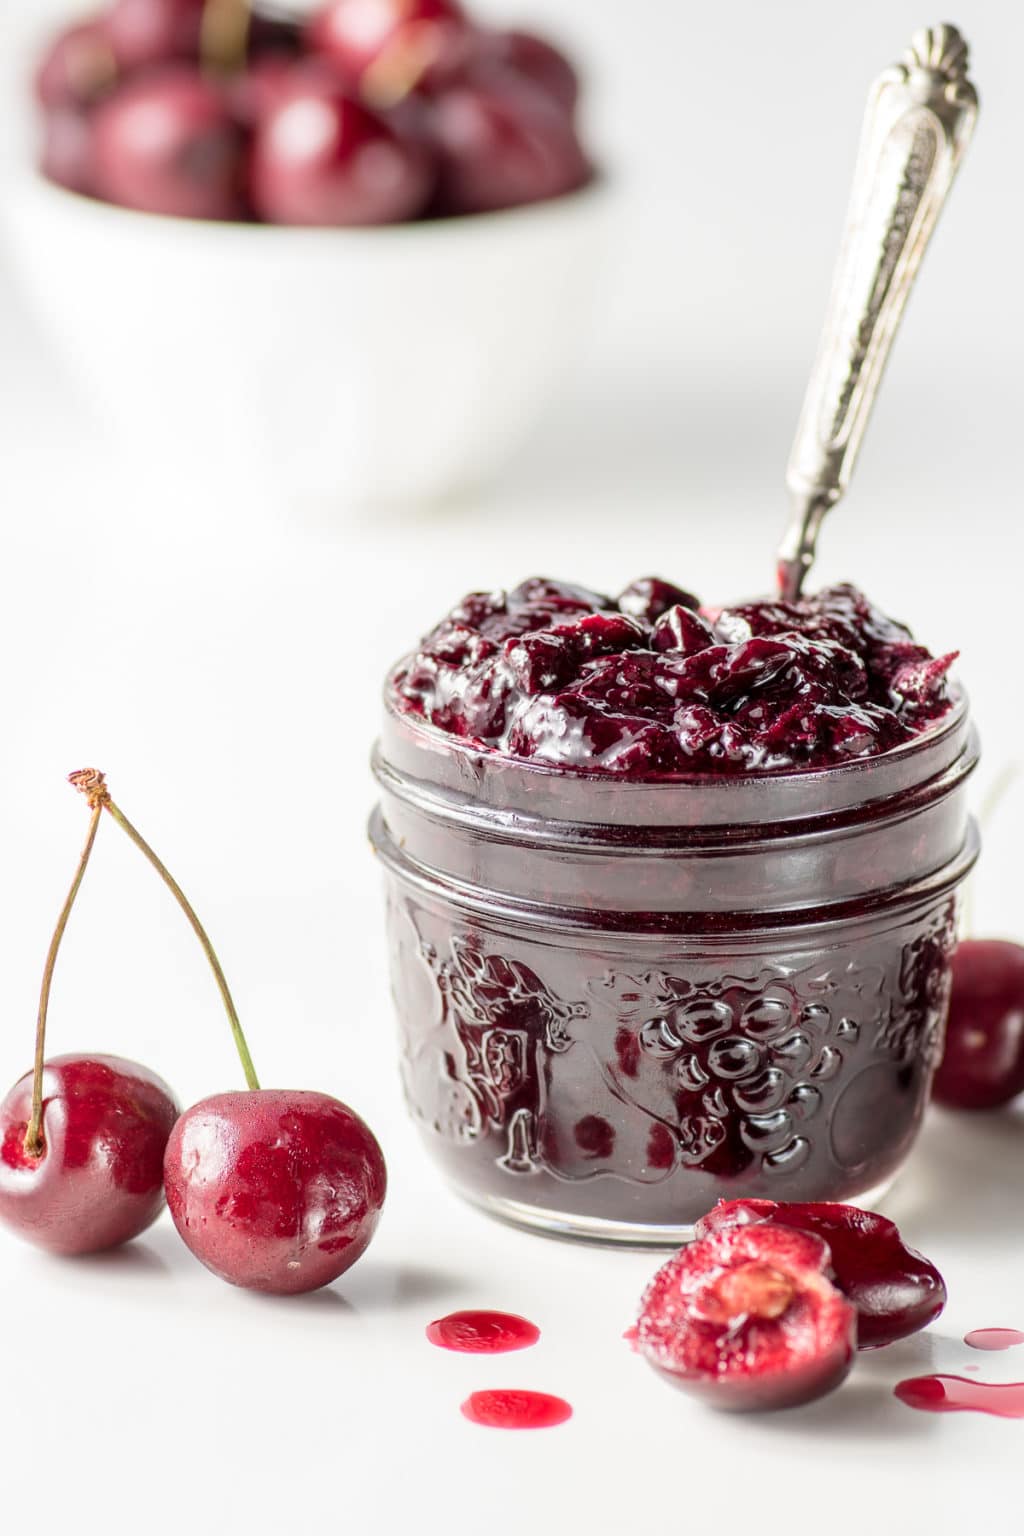 Cherry Jam Recipe Made Without Sugar (Shelf Stable and Gooey!)